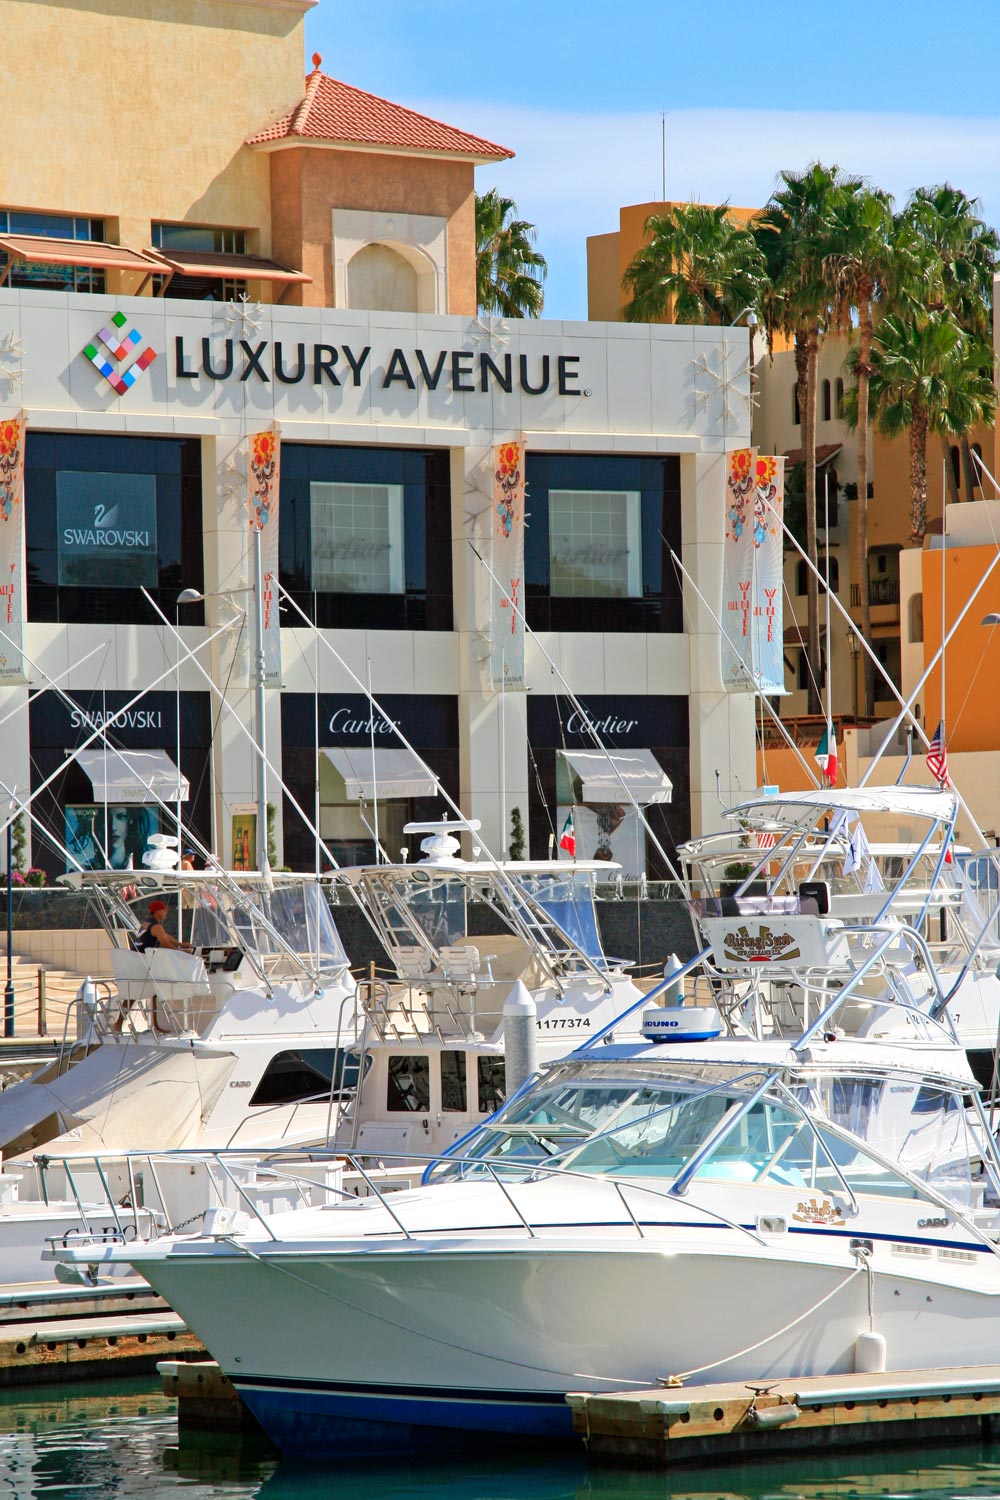 Luxury Avenue is the place to go in Cabo San Lucas to buy luxury brand goods.